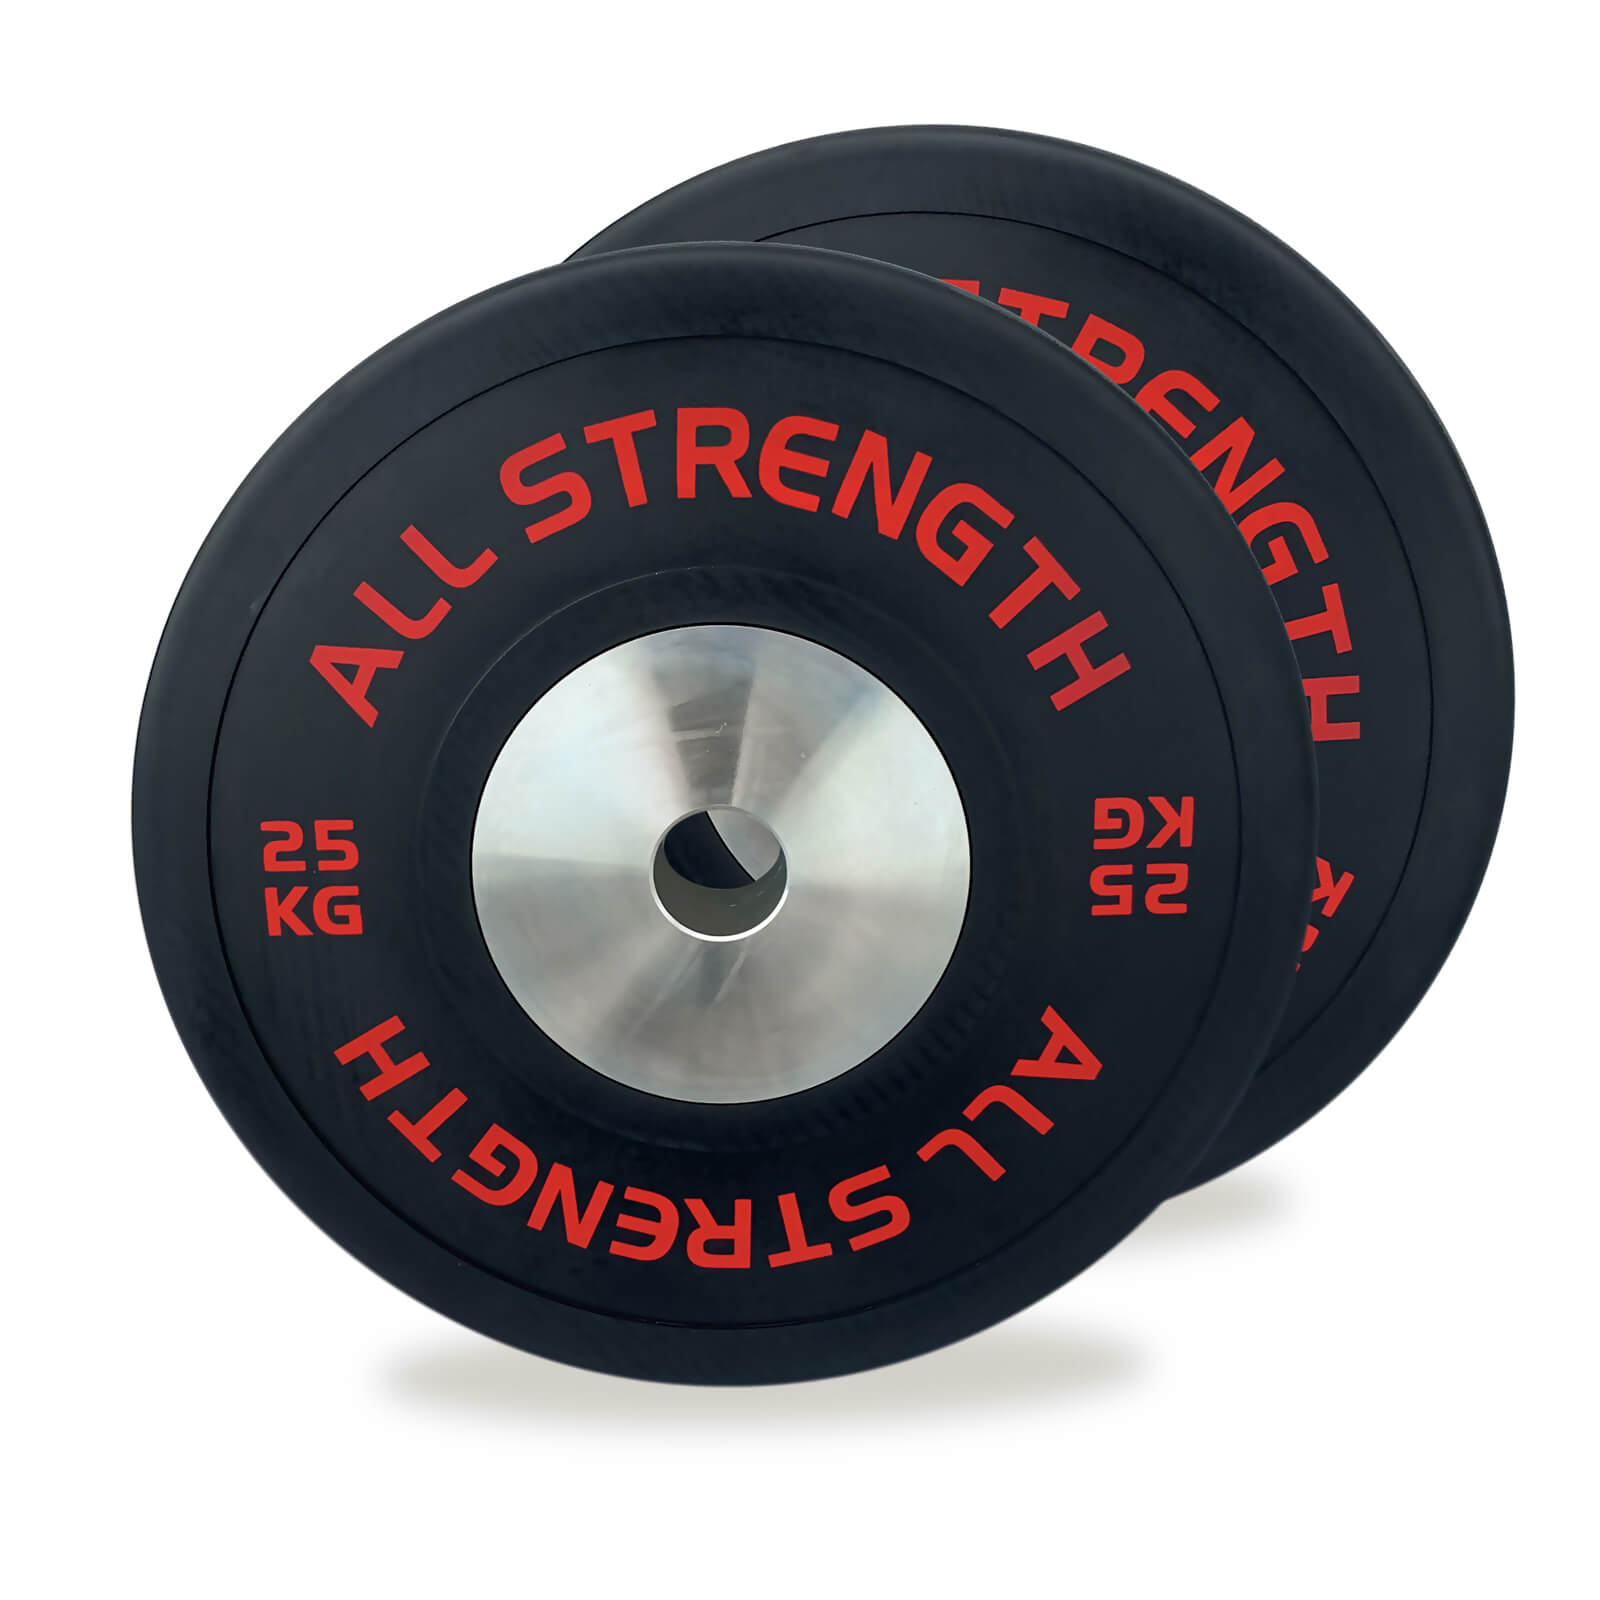 Competition Bumper Plates, 2 x 25 kg, AllStrength